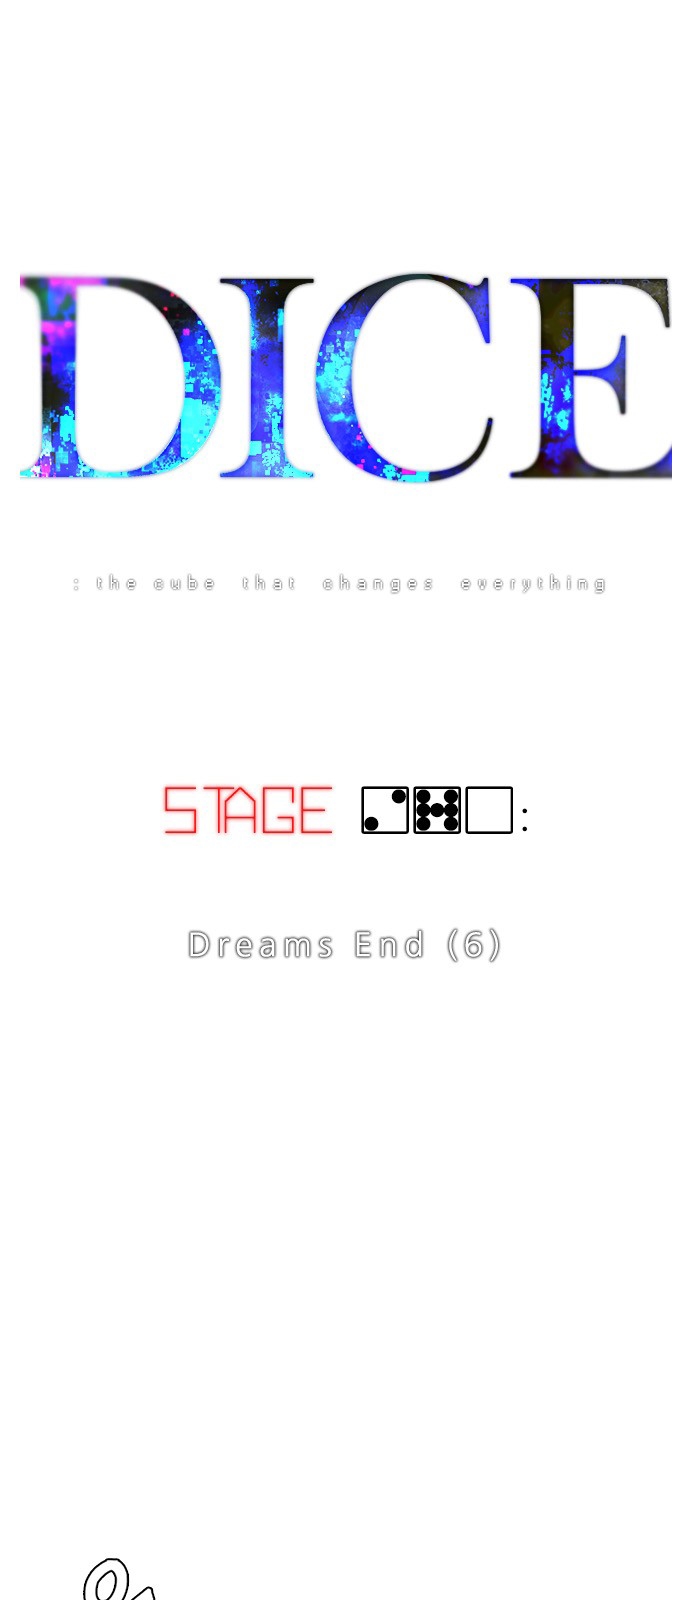 DICE: The Cube that Changes Everything Ch. 270 Dreams end (6)